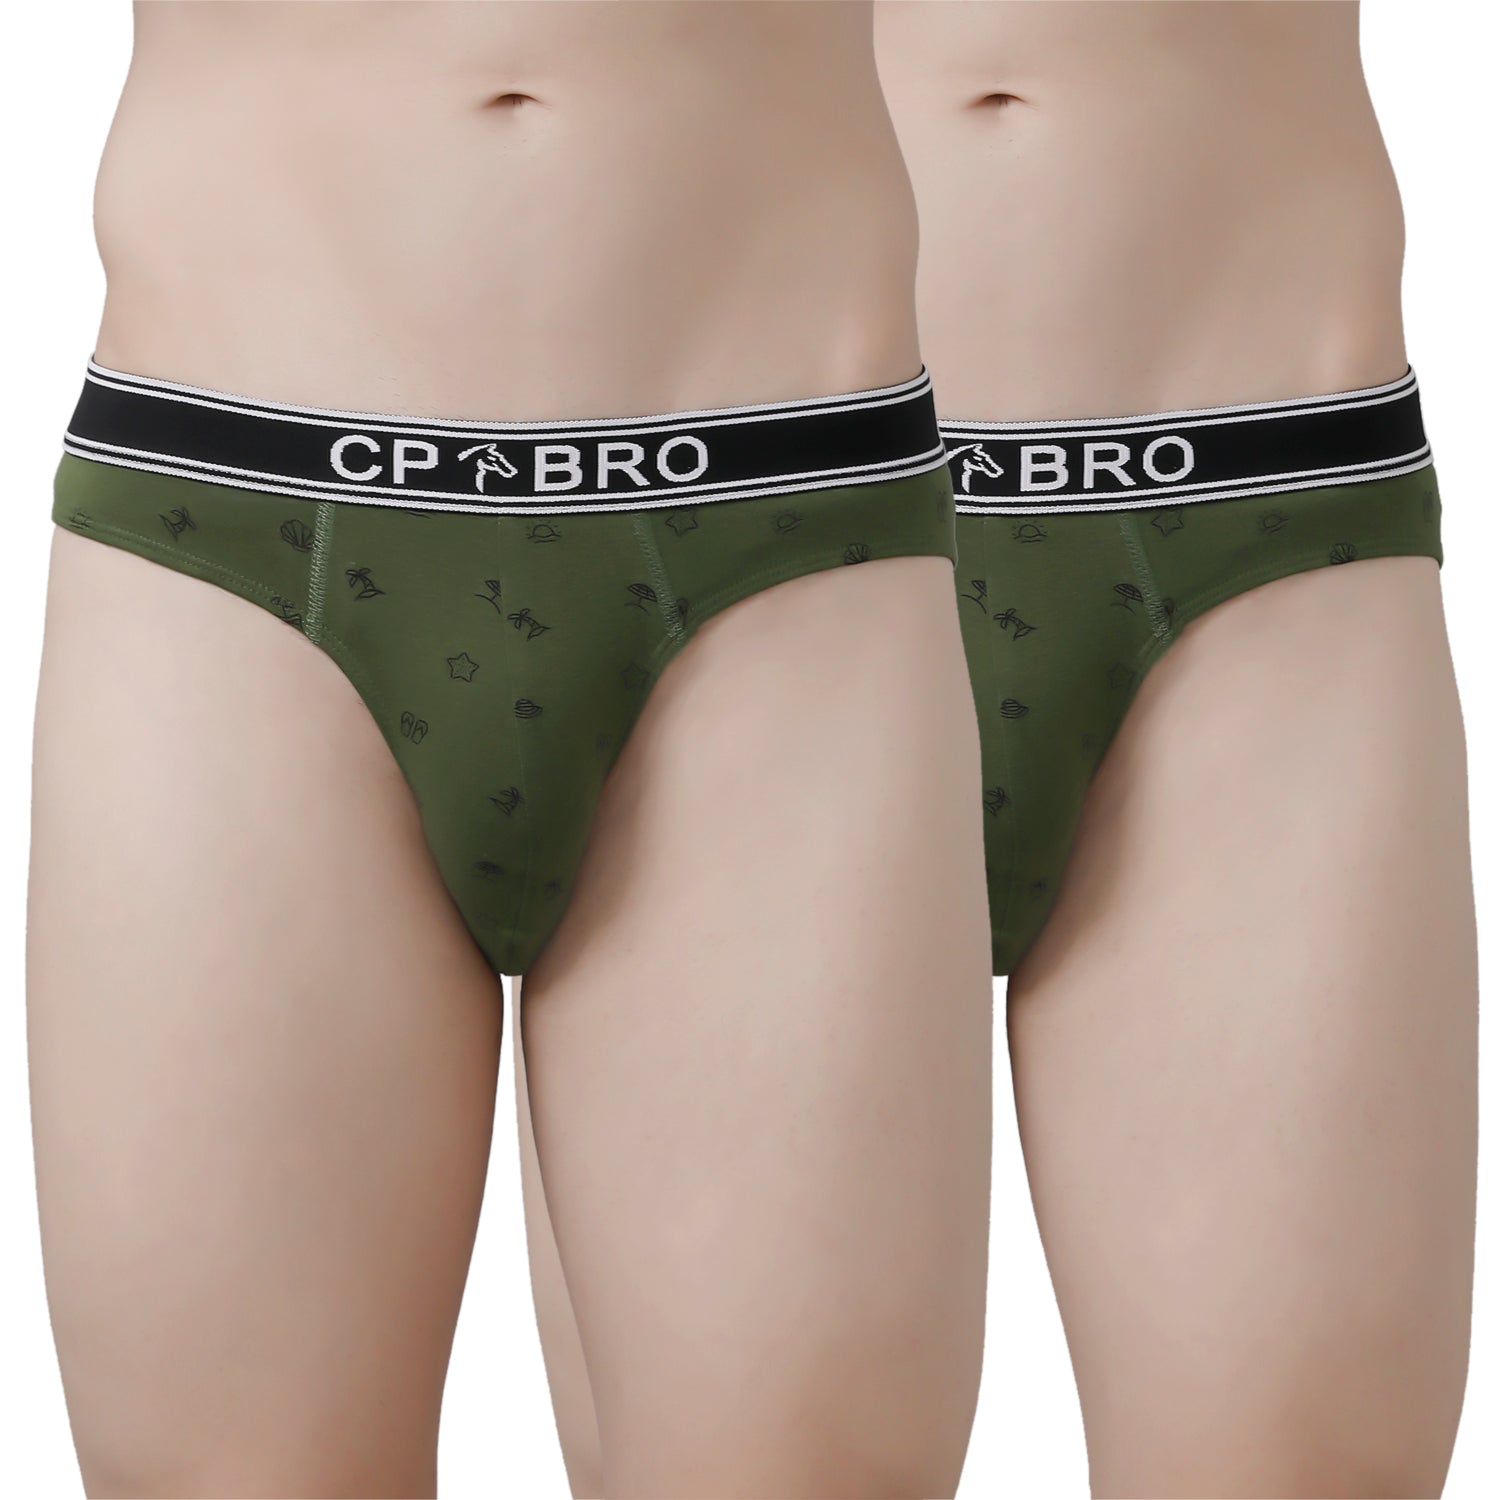 CP BRO Men's Printed Briefs with Exposed Waistband Value Pack - Olive